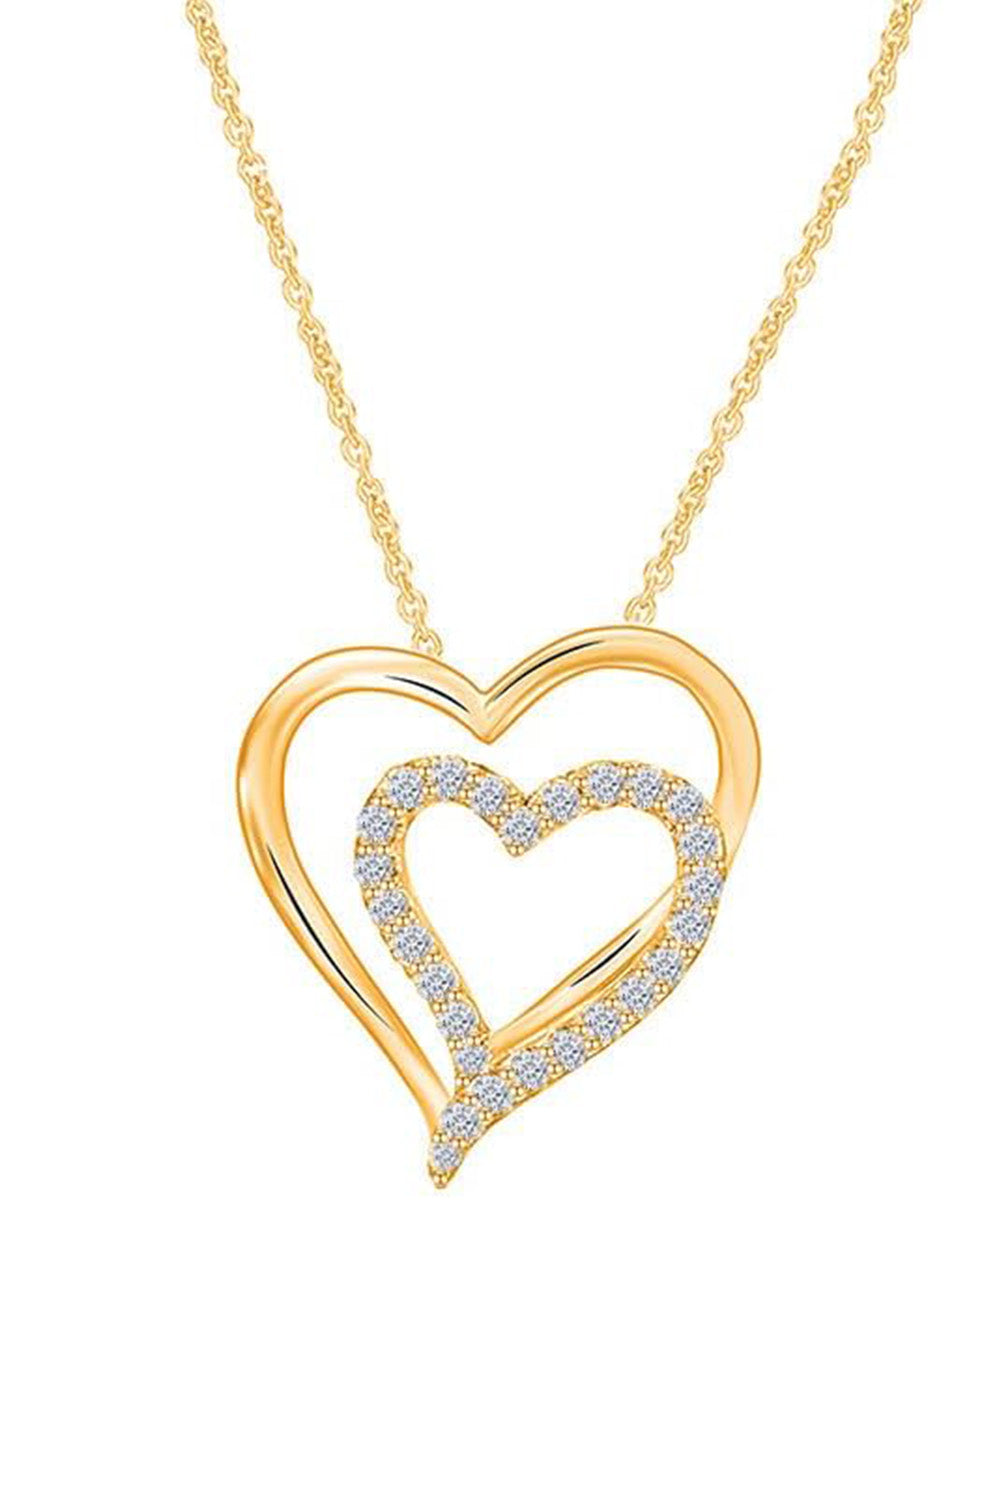 Yellow Gold Color Double Heart Pendant Necklace